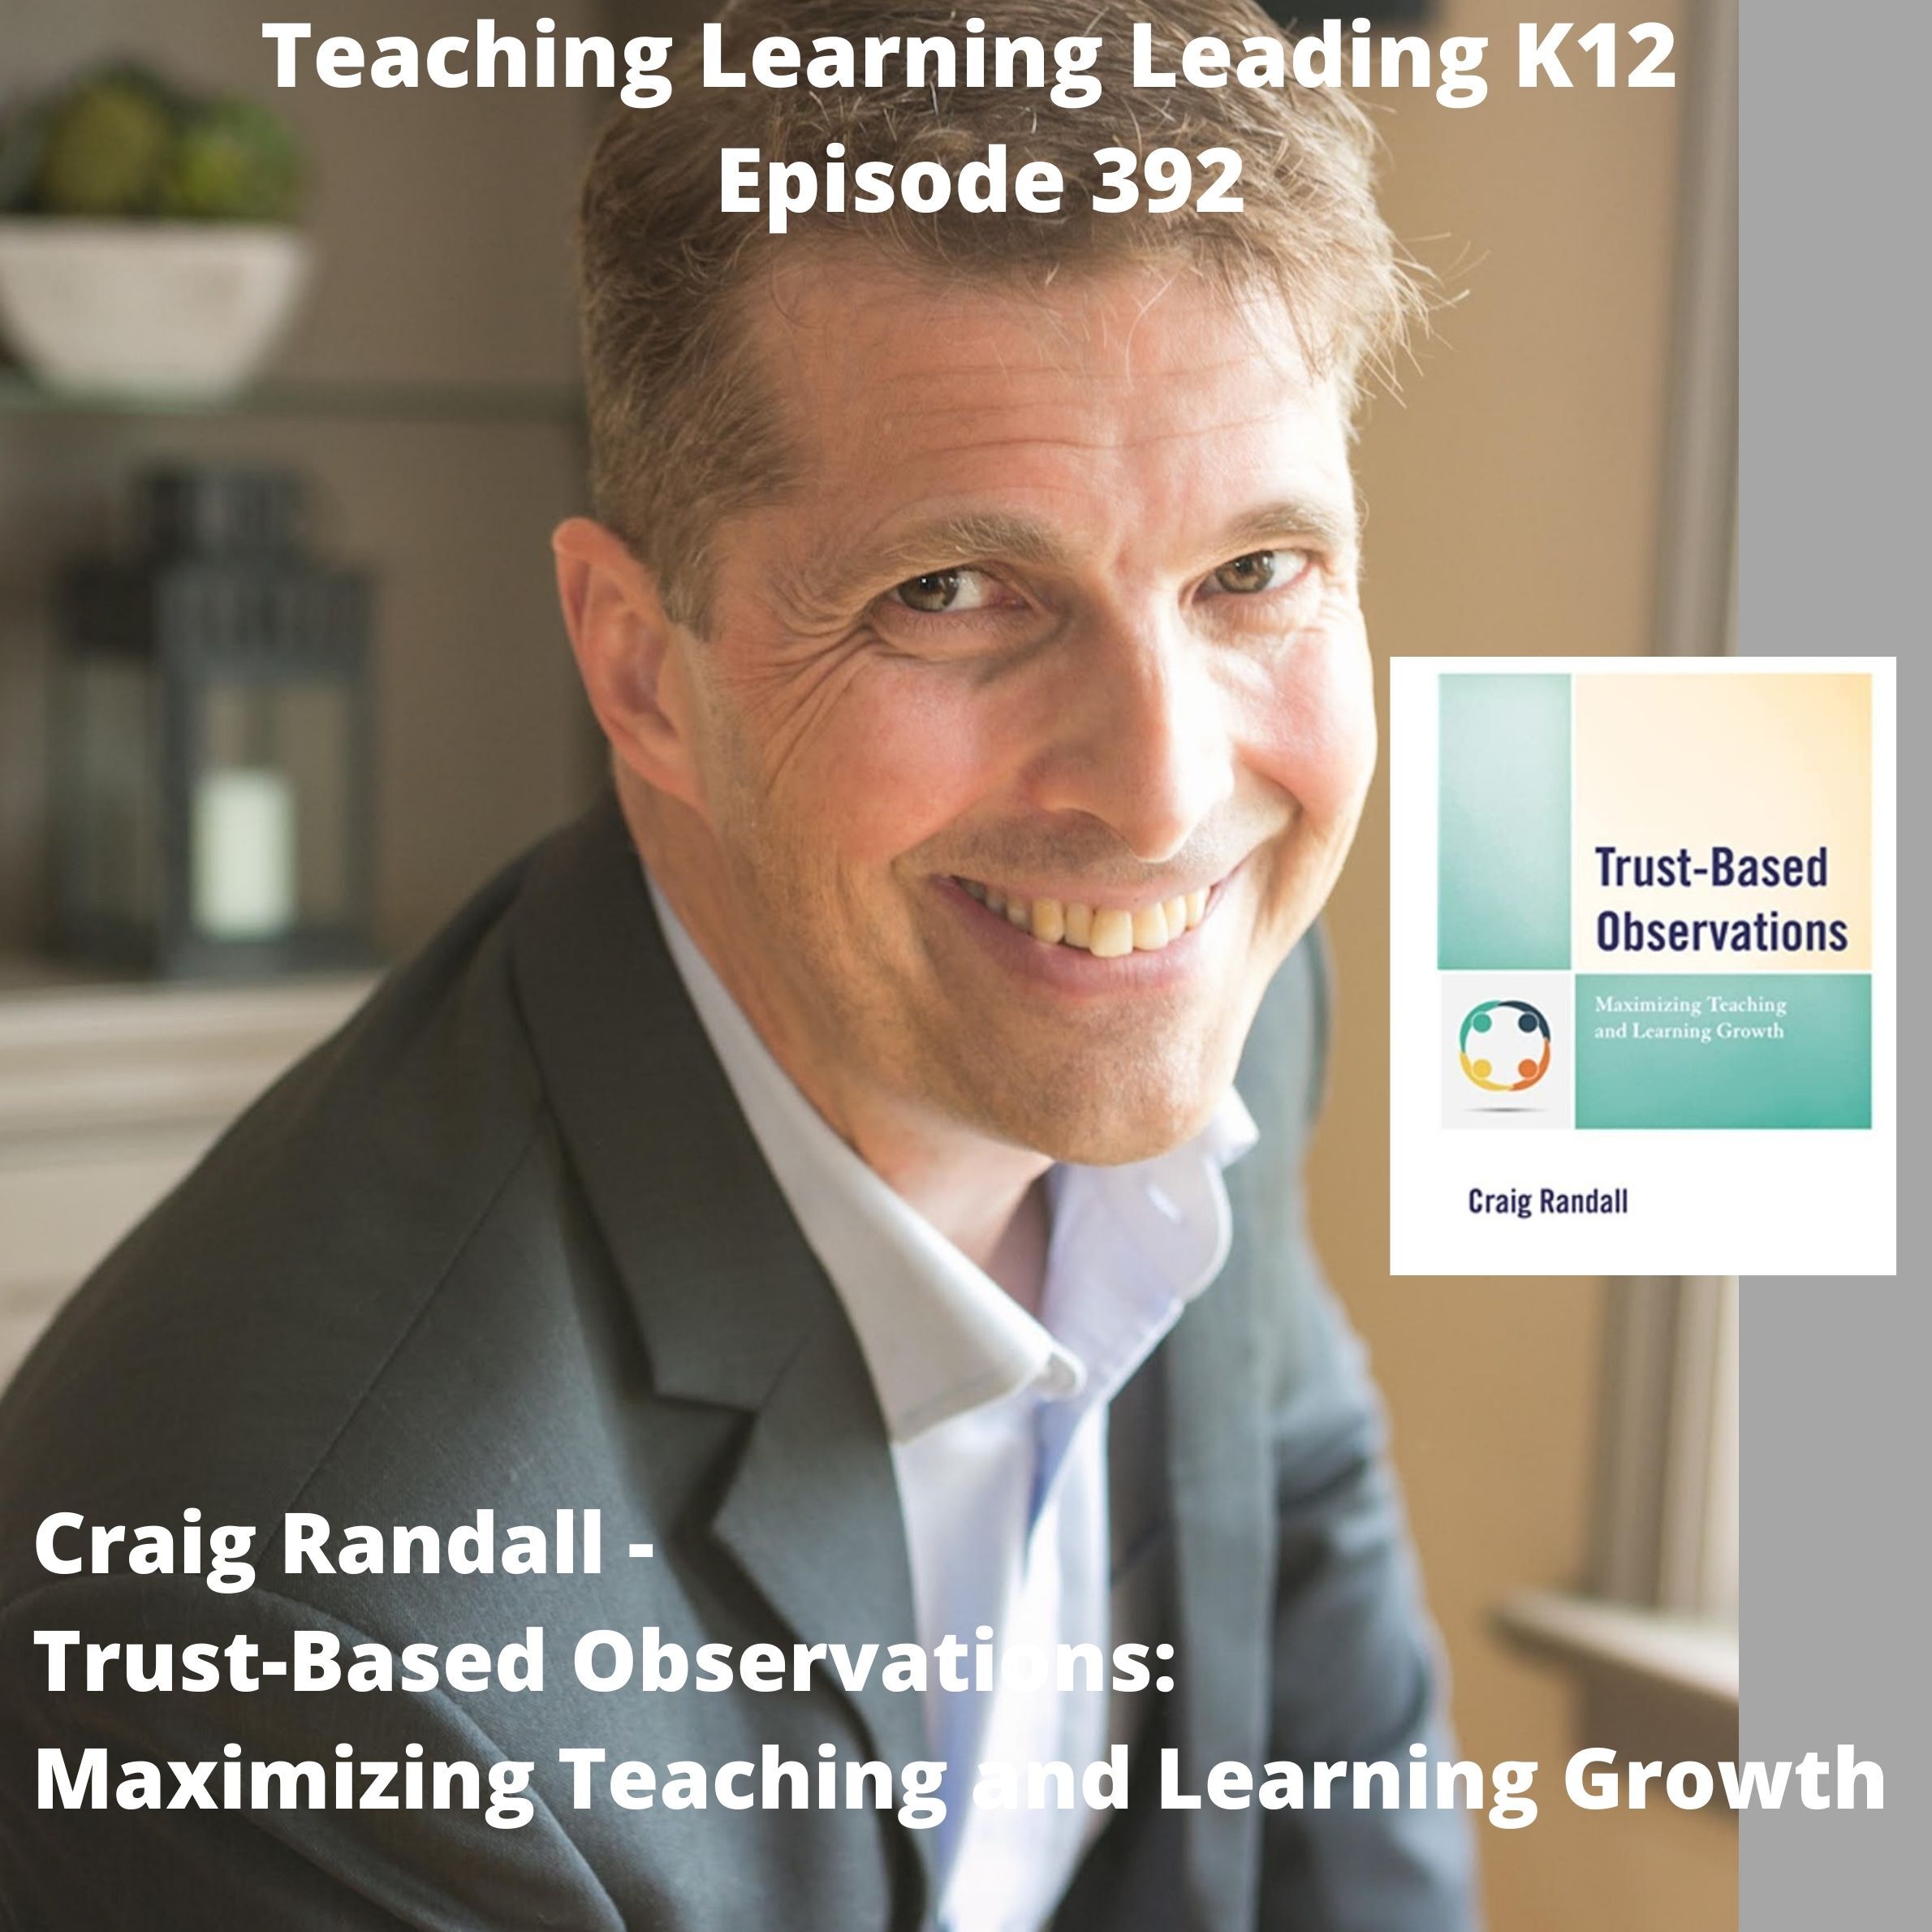 Craig Randall - Trust-Based Observations: Maximizing Teaching and Learning Growth - 392